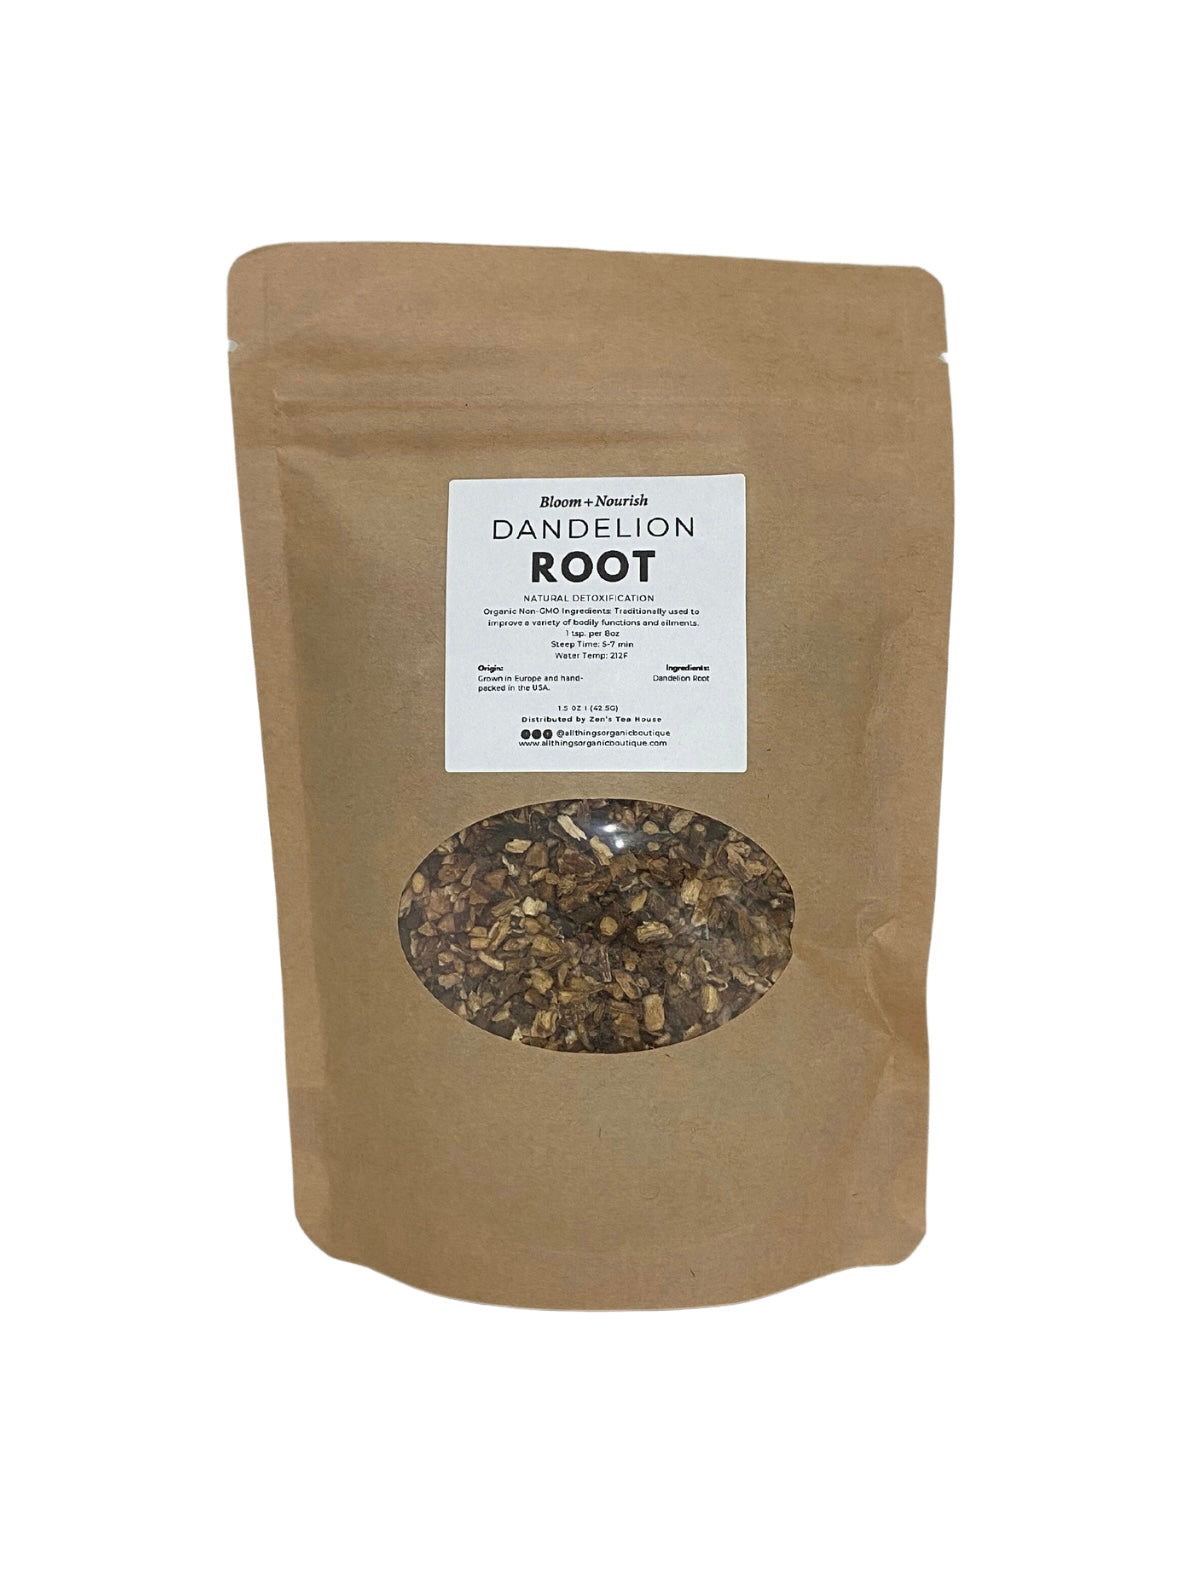 Dandelion root has been used historically in diverse parts of the world to improve a variety of bodily functions and ailments. 